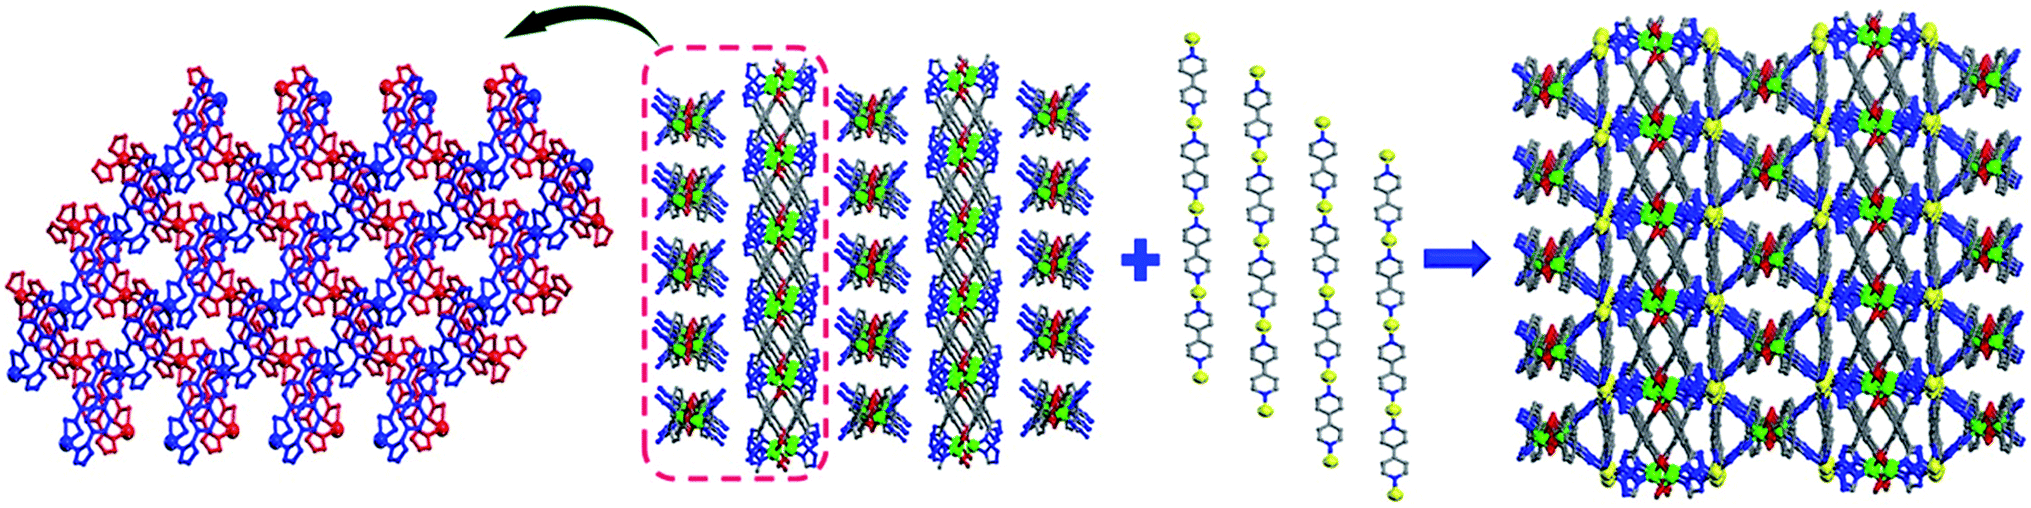 Luminescent MOF material based on cadmium( ii ) and mixed ligands ...